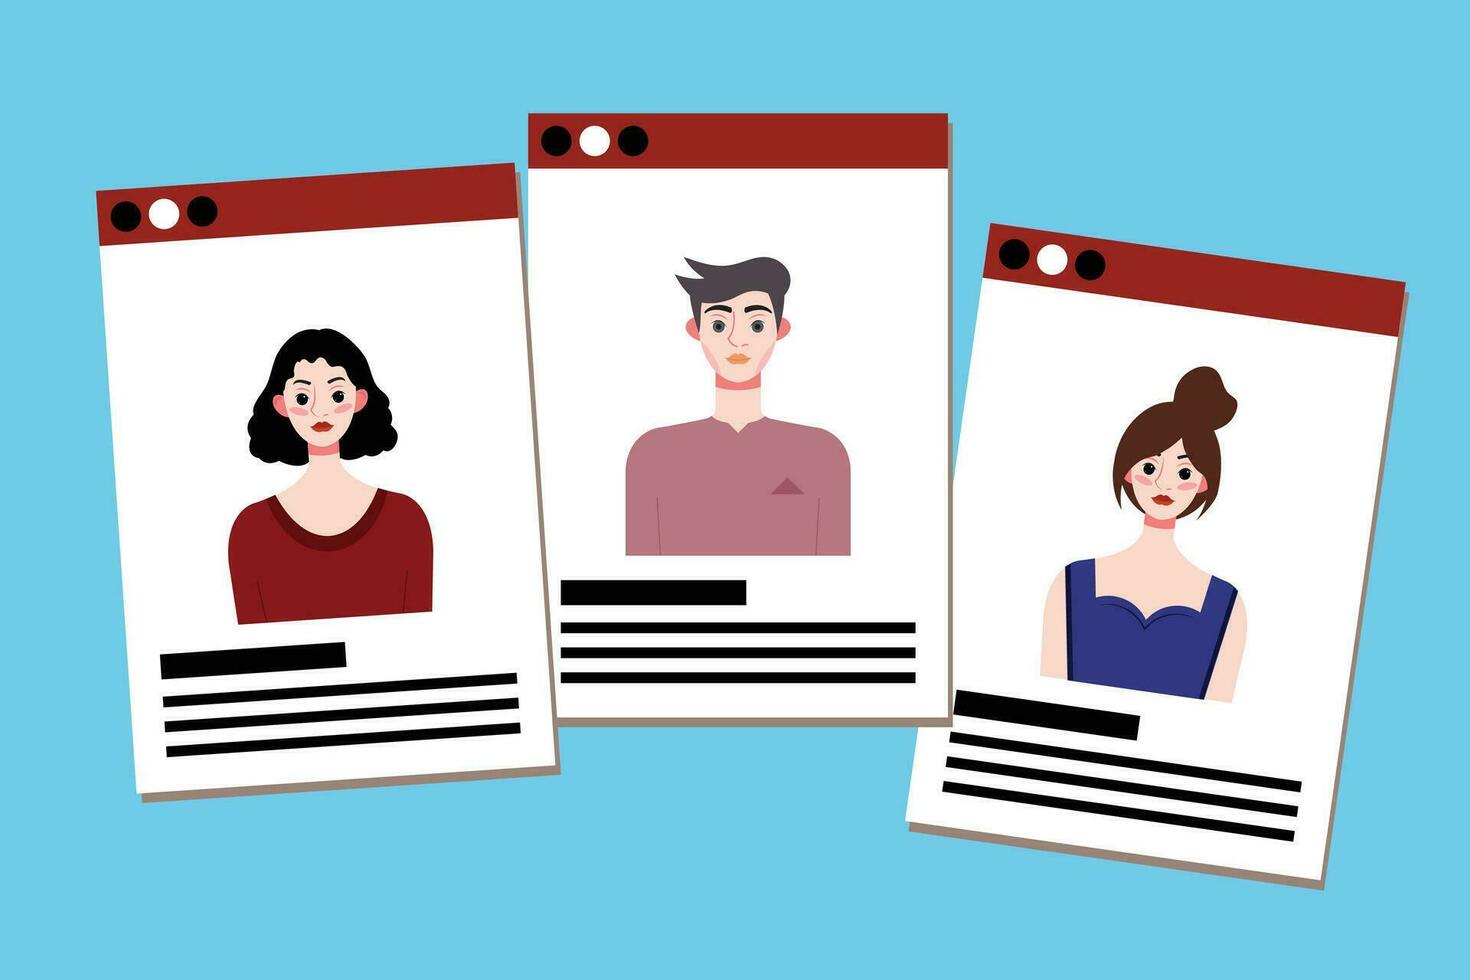 Set of profile photo templates for social networks. Vector illustration in flat style